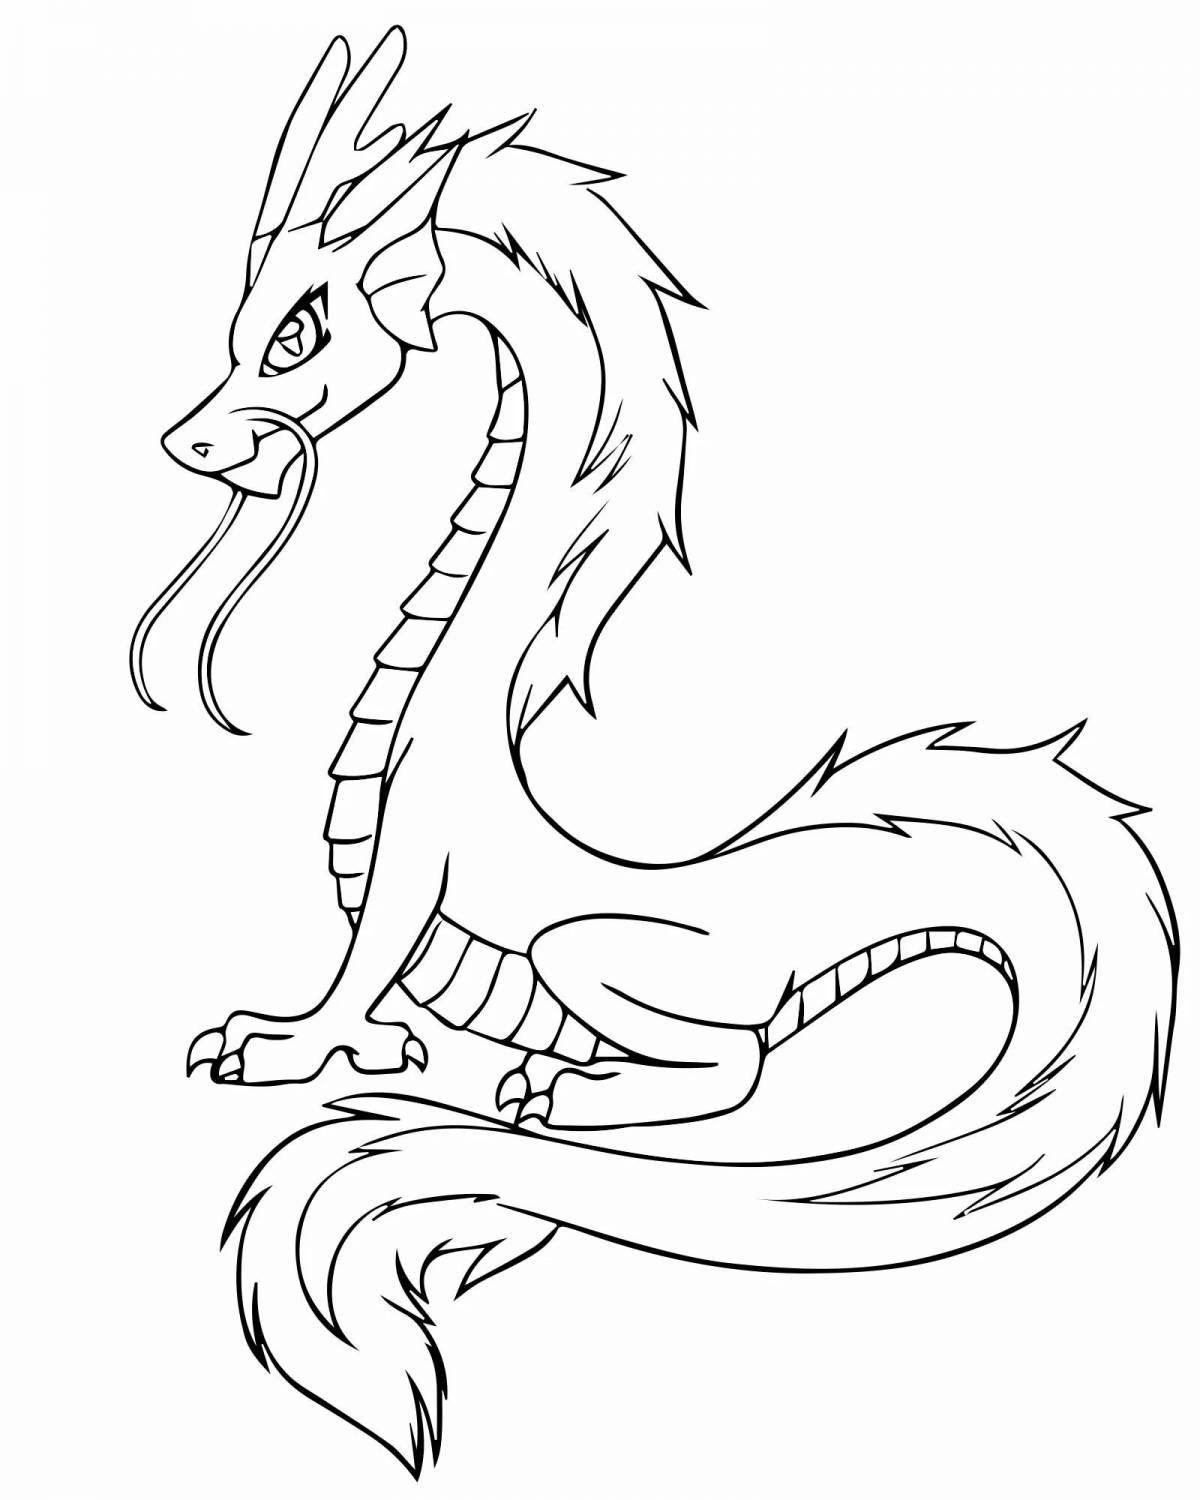 Mystical chinese dragon coloring pages for kids